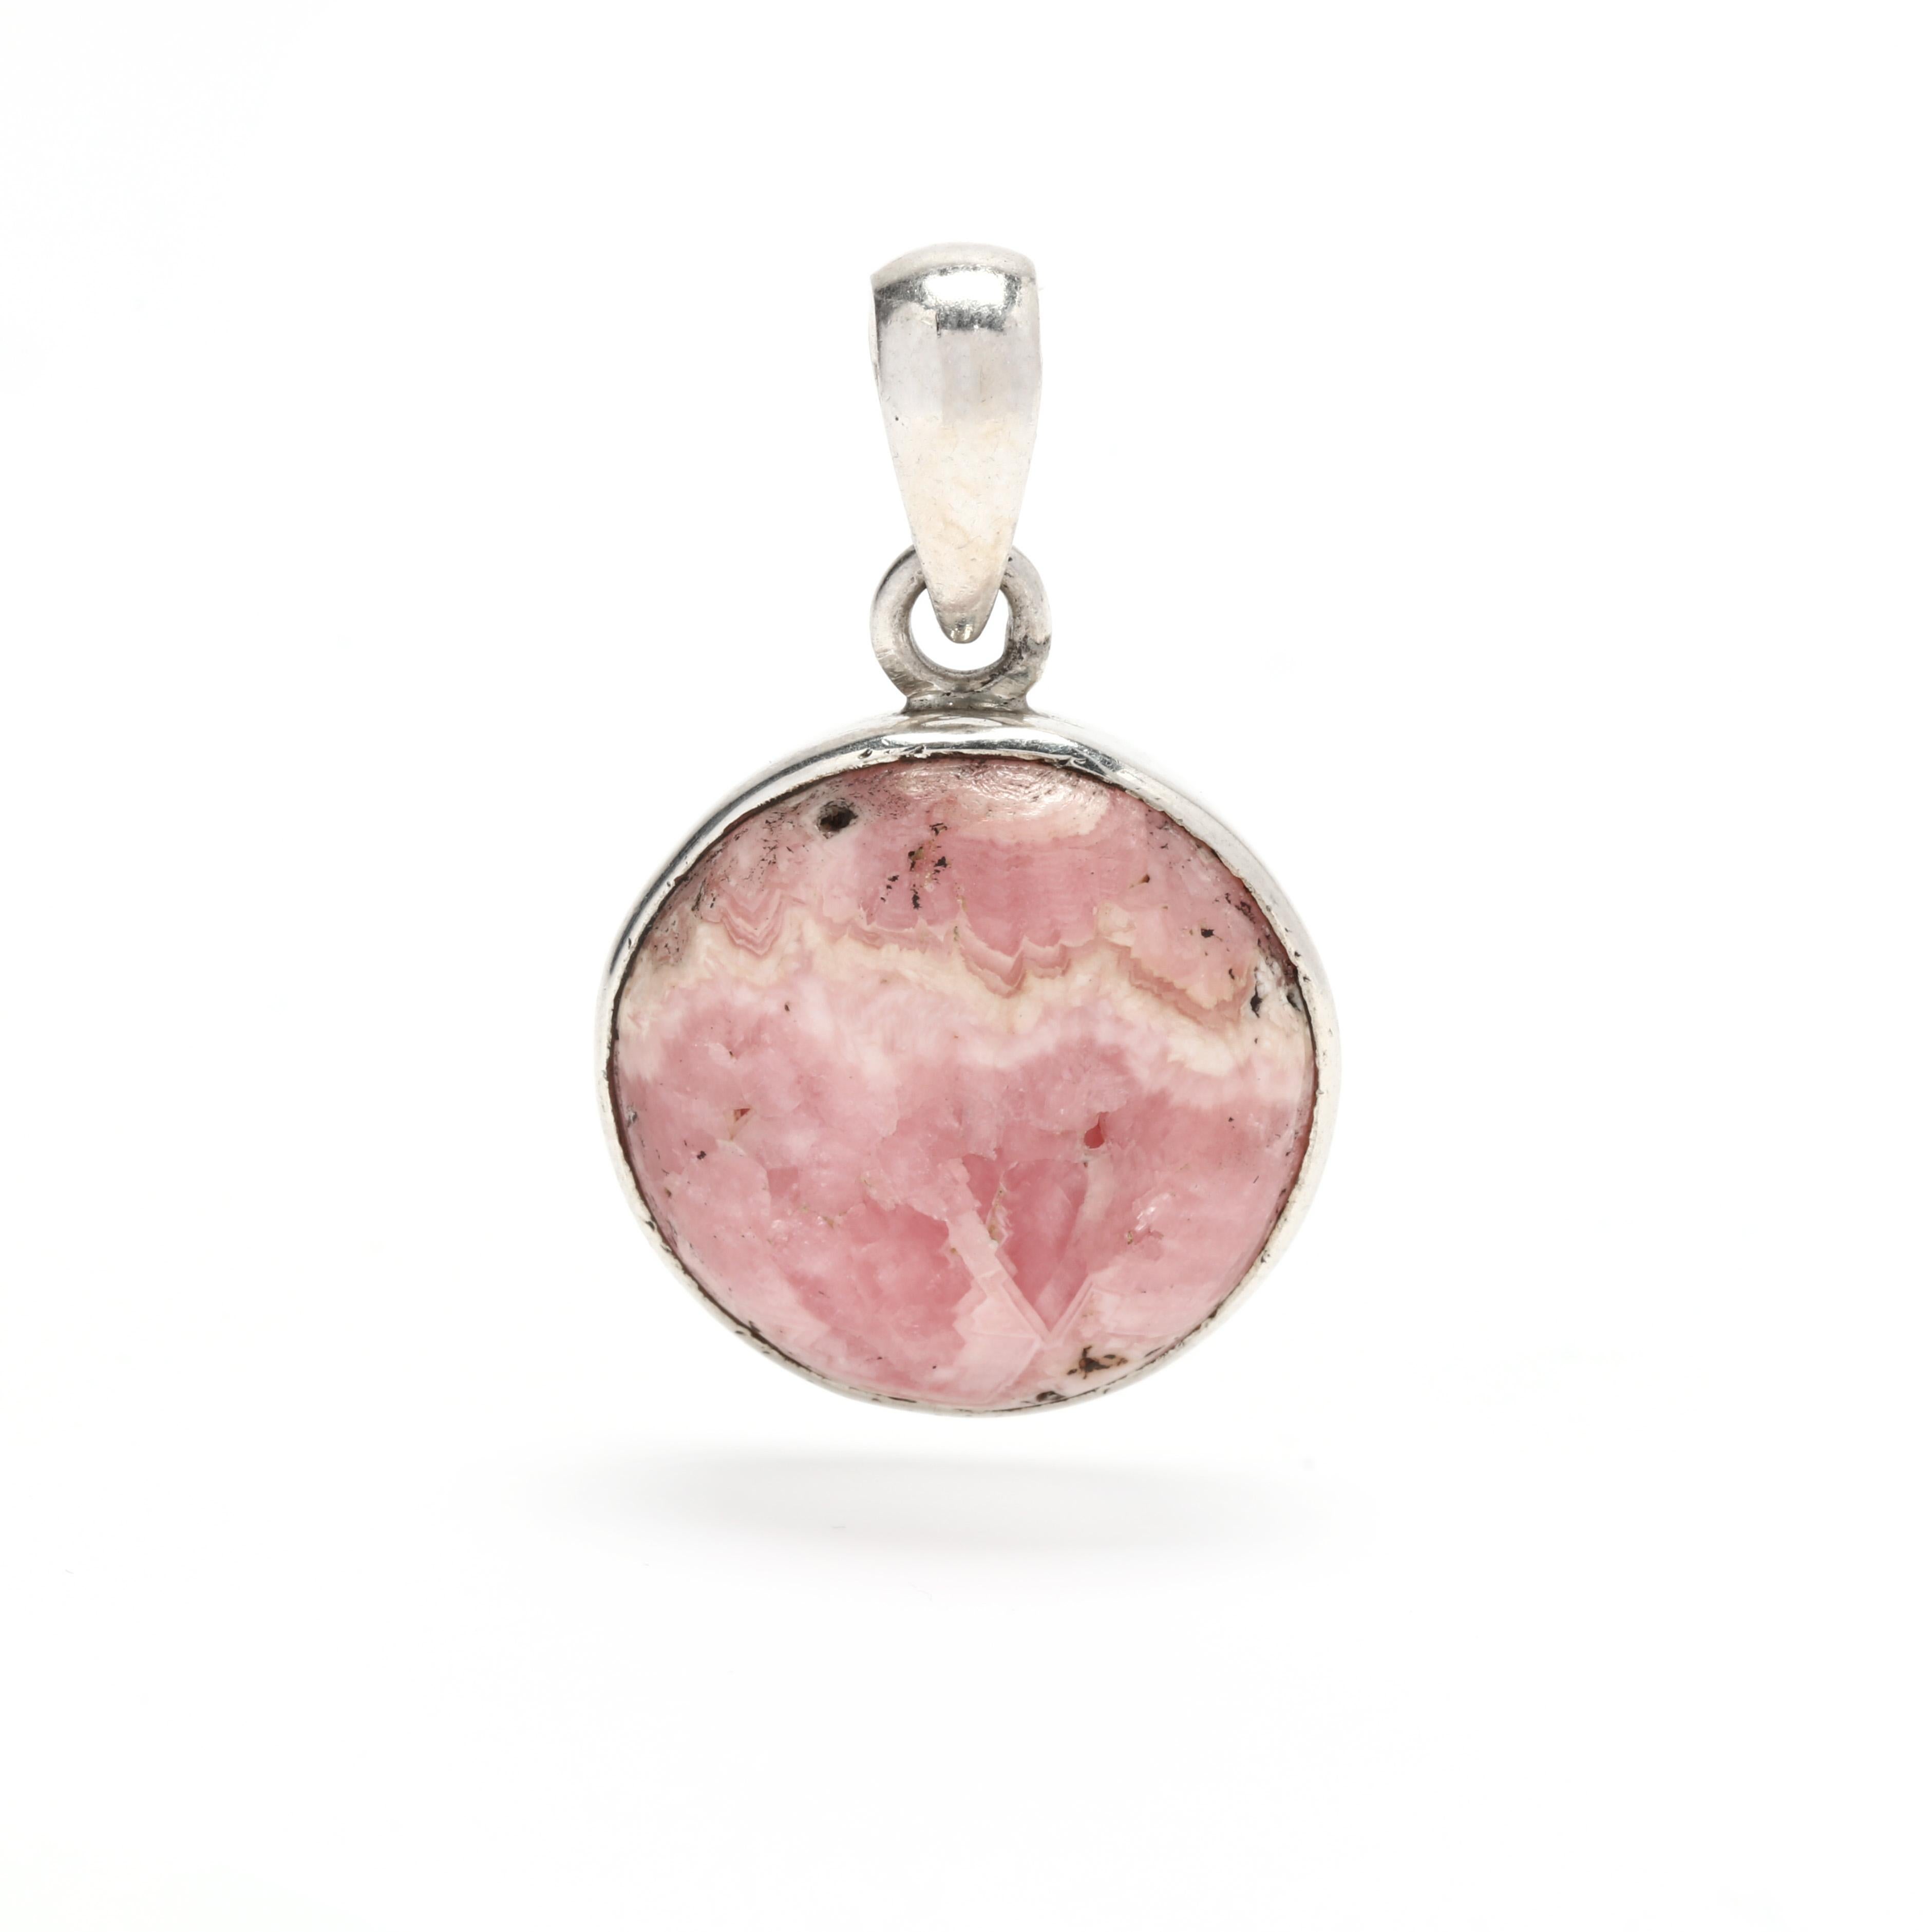 This stunning Rhodochrosite Pendant is the perfect accessory to add a touch of elegance to any outfit. Handcrafted from sterling silver, this 1 1/8 inch round pink pendant is the perfect circle shape. The unique pink hues of the Rhodochrosite will